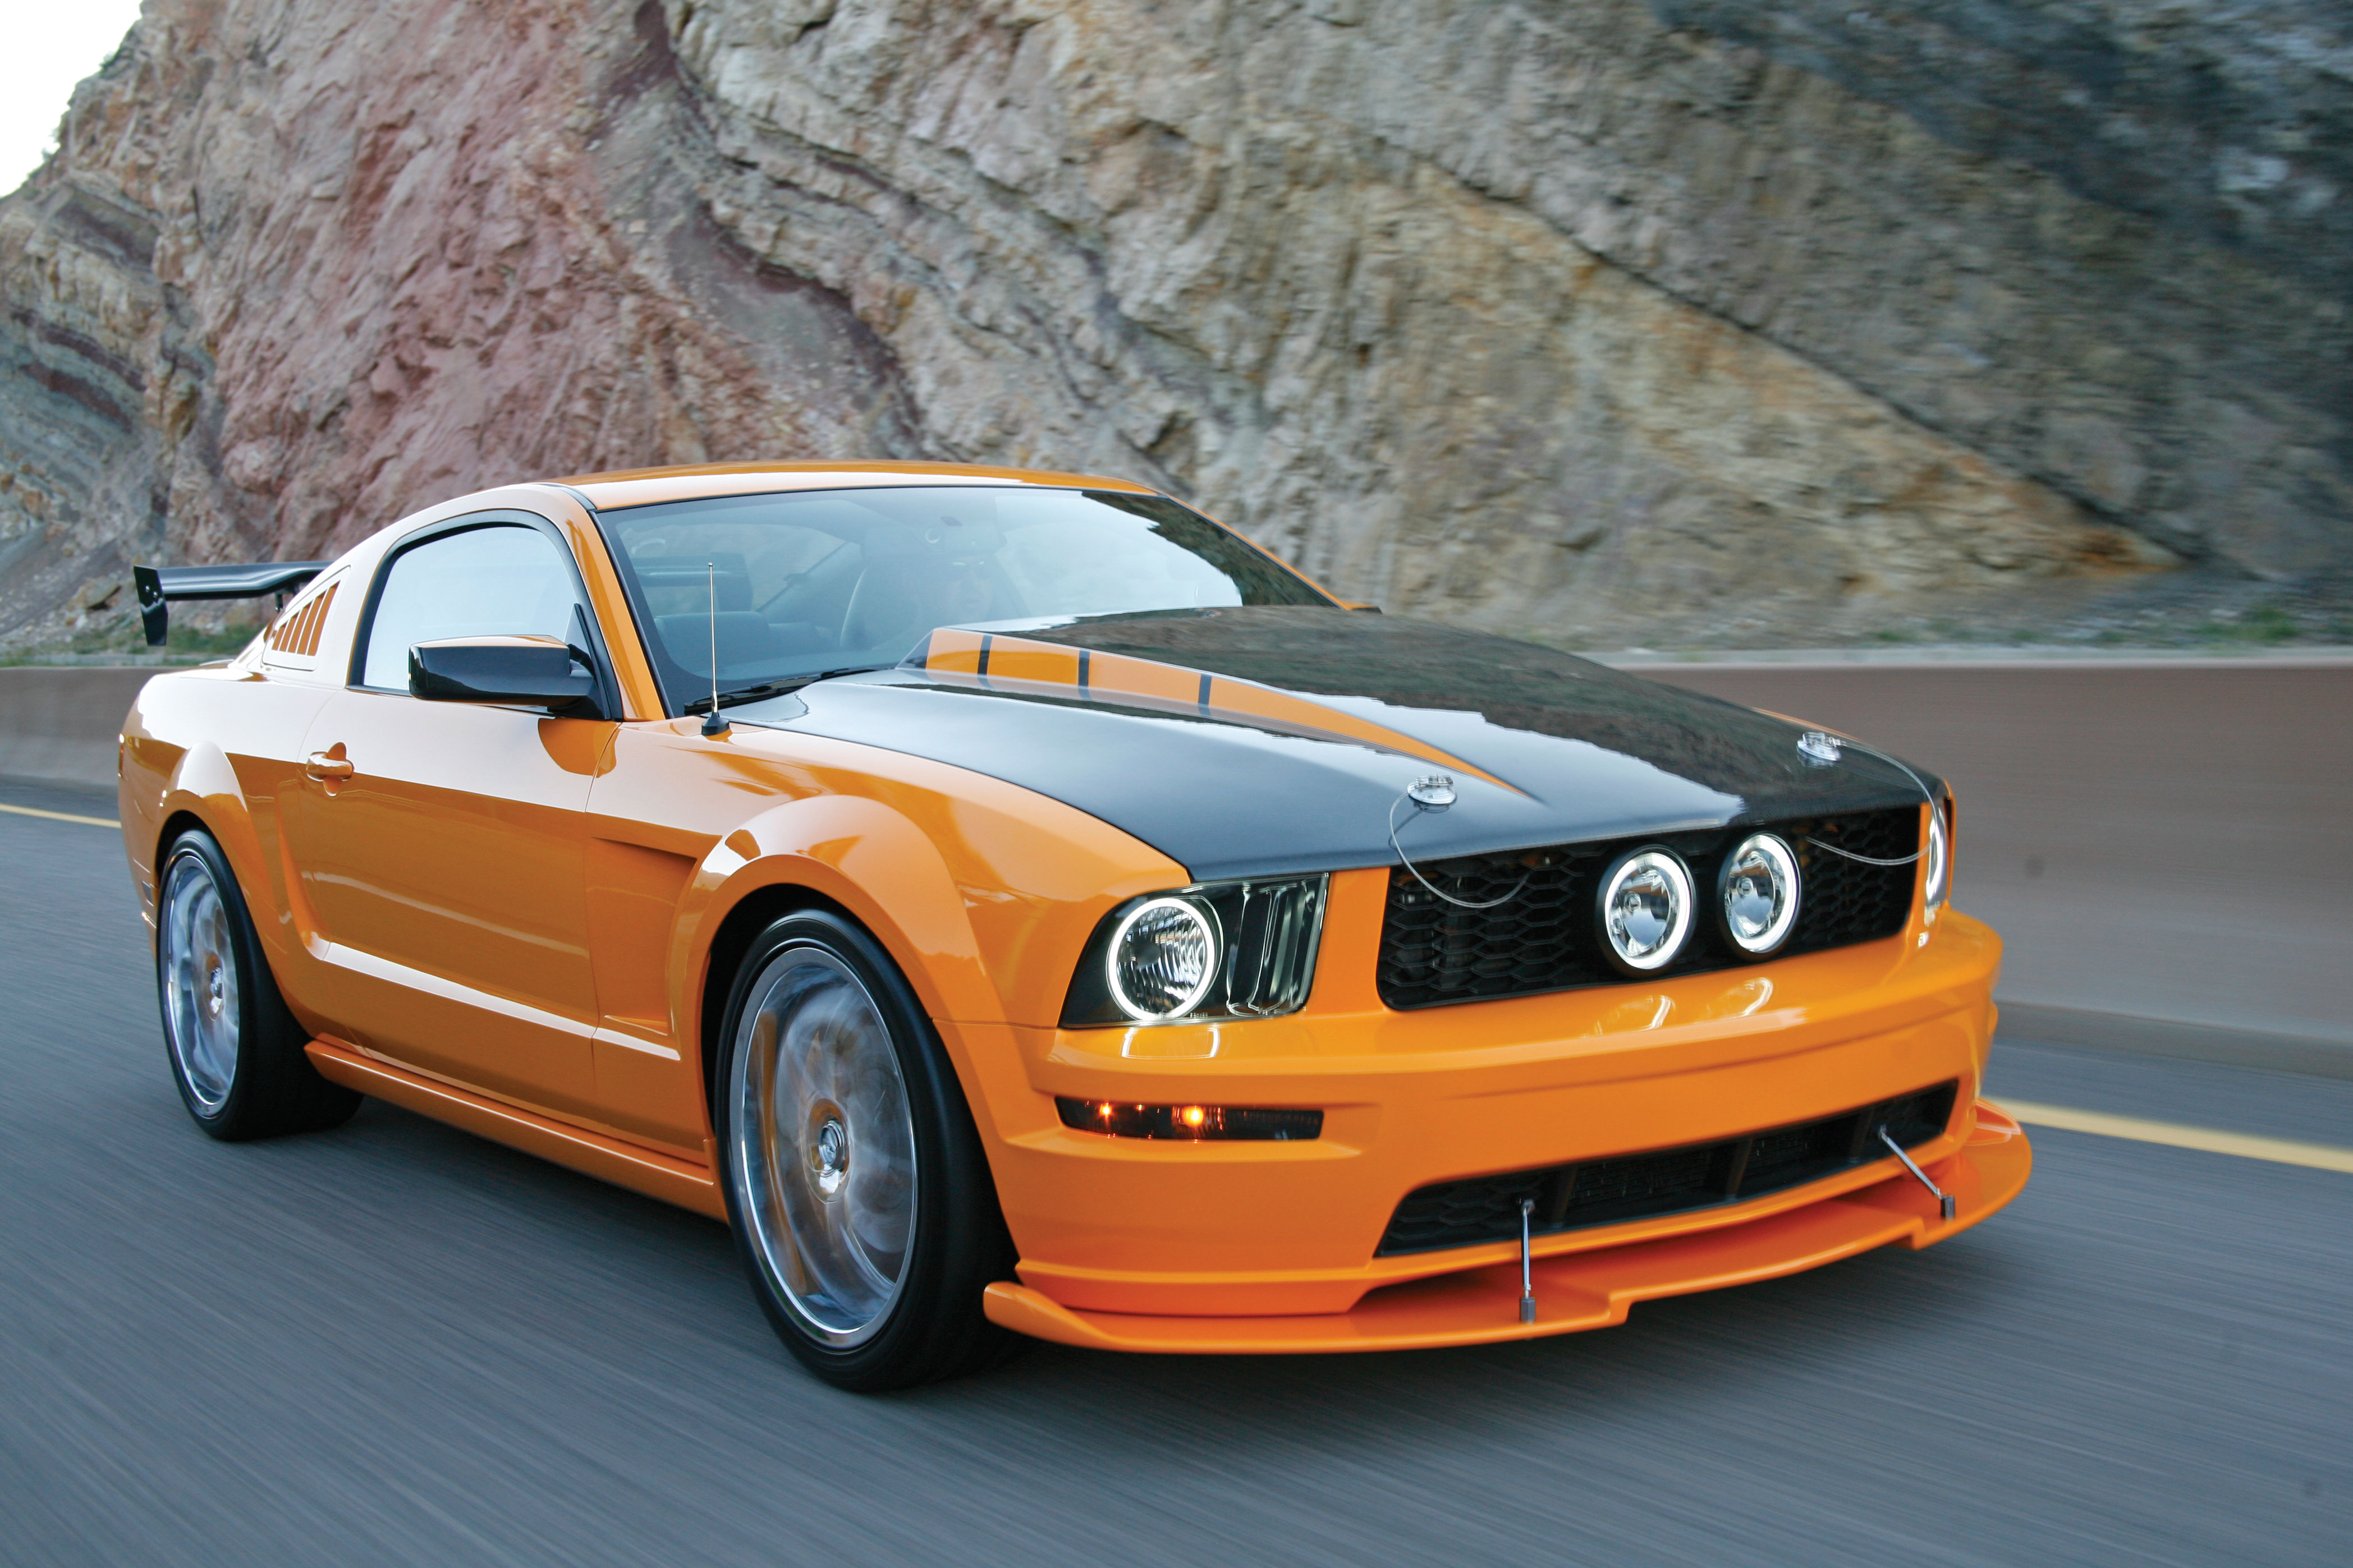 2007 Ford Mustang Information and photos MOMENTcar